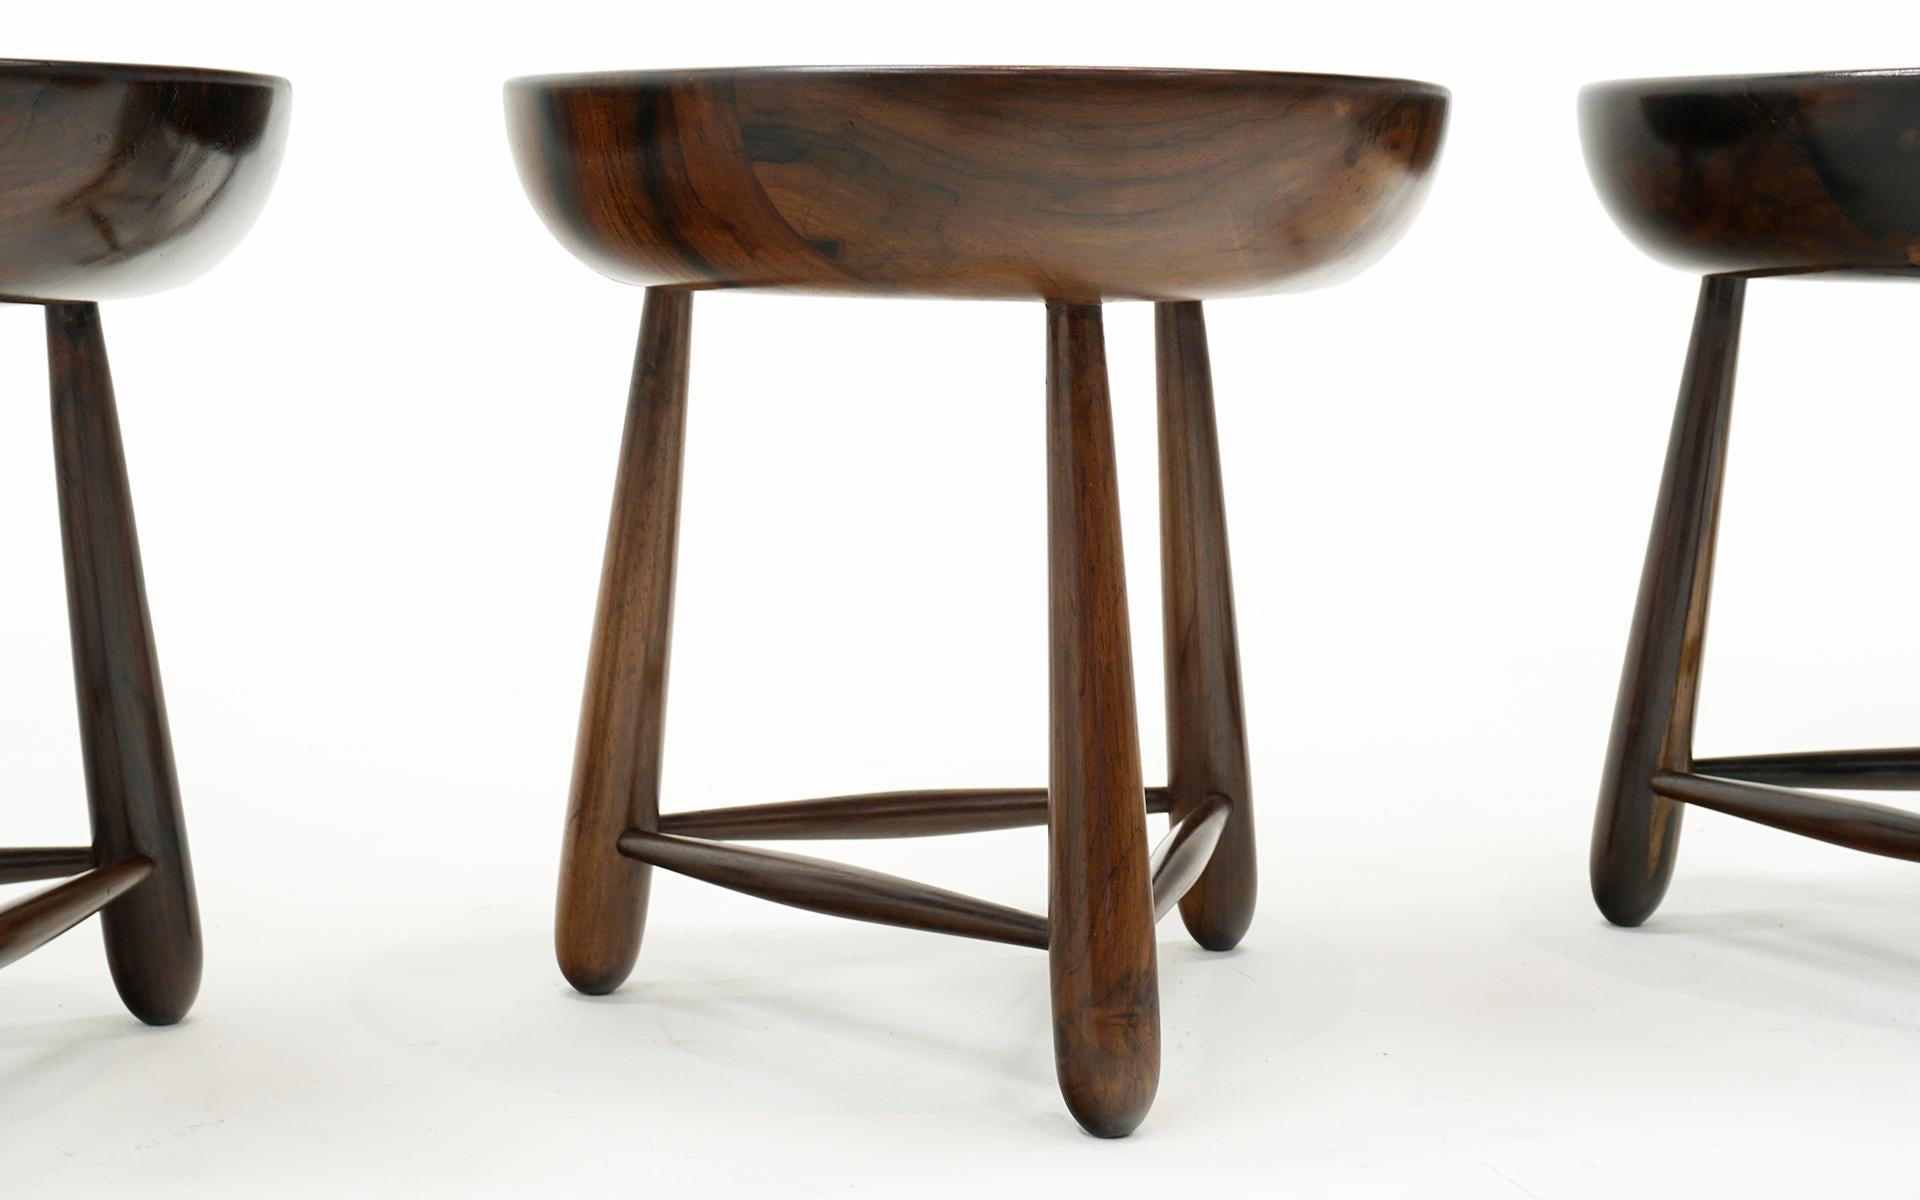 Mid-20th Century Mocho Stool in Rosewood by  Sergio Rodrigues for Oca, Brazil, 1954. Signed. For Sale